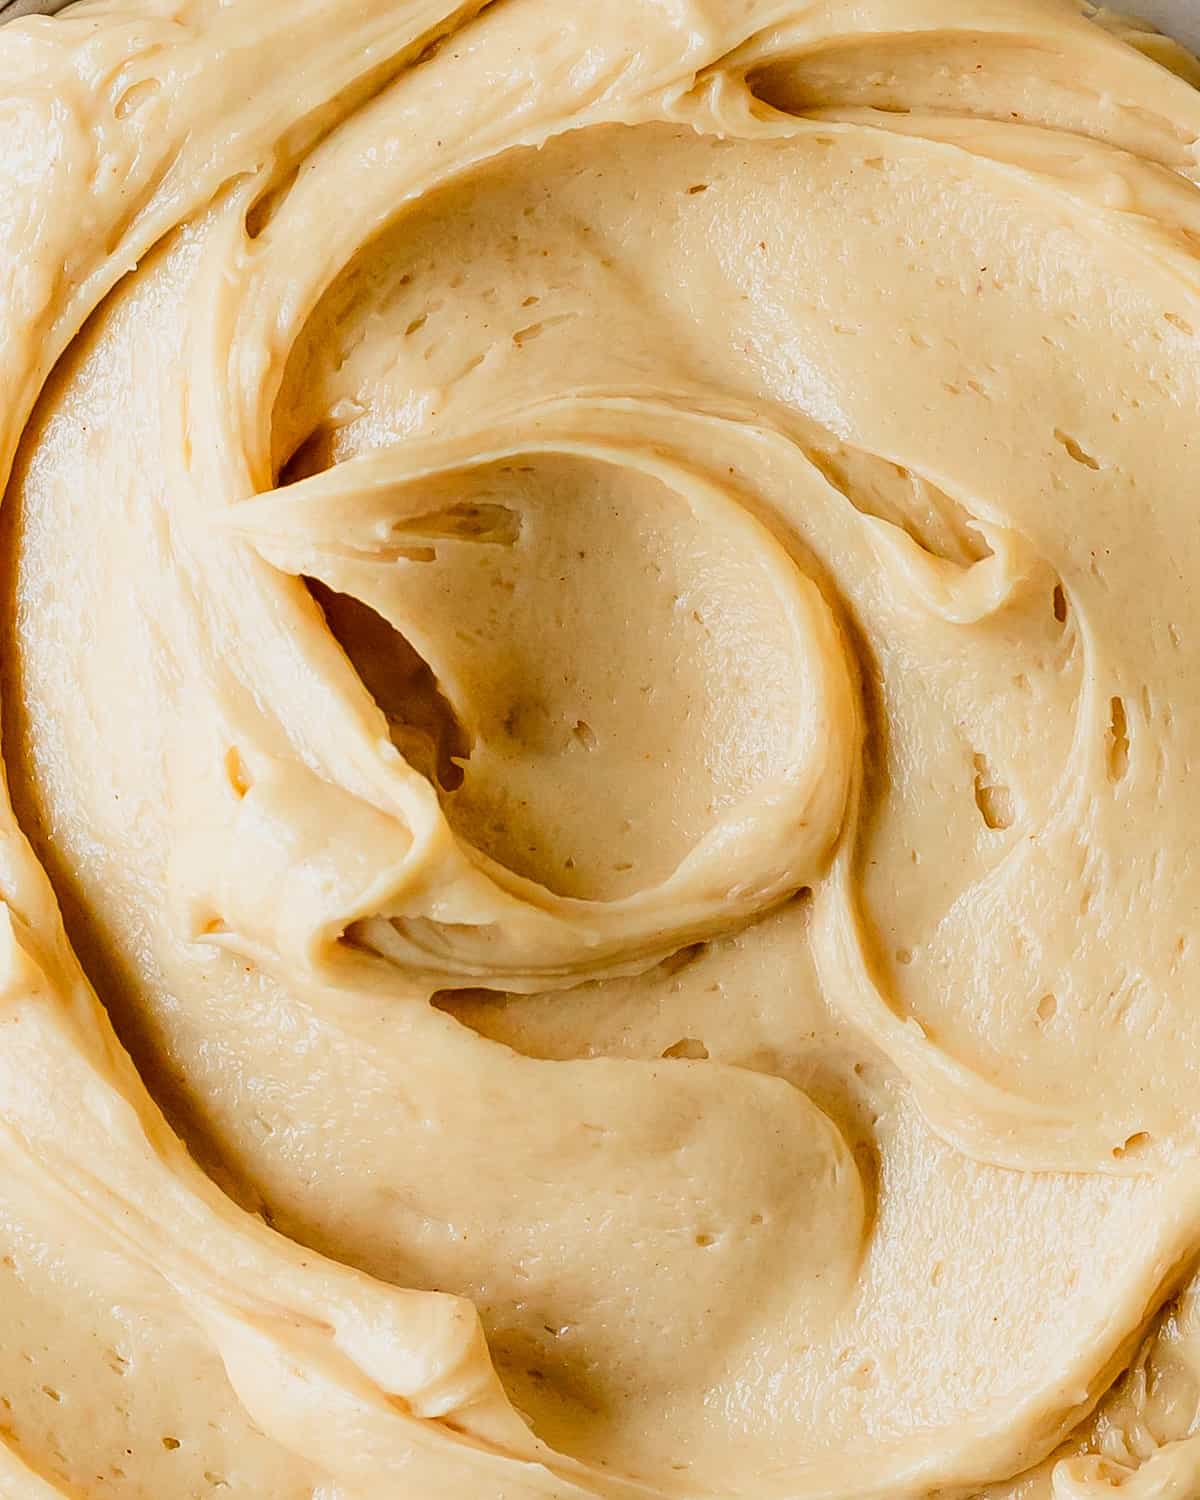 Peanut butter cream cheese frosting is a rich, creamy, nutty and slightly tangy peanut butter icing. This peanut butter frosting with cream cheese is easy to make, using just a handful of ingredients. This recipe makes the perfect peanut butter frosting for cookies, cakes, cupcakes or to enjoy by the spoonful.